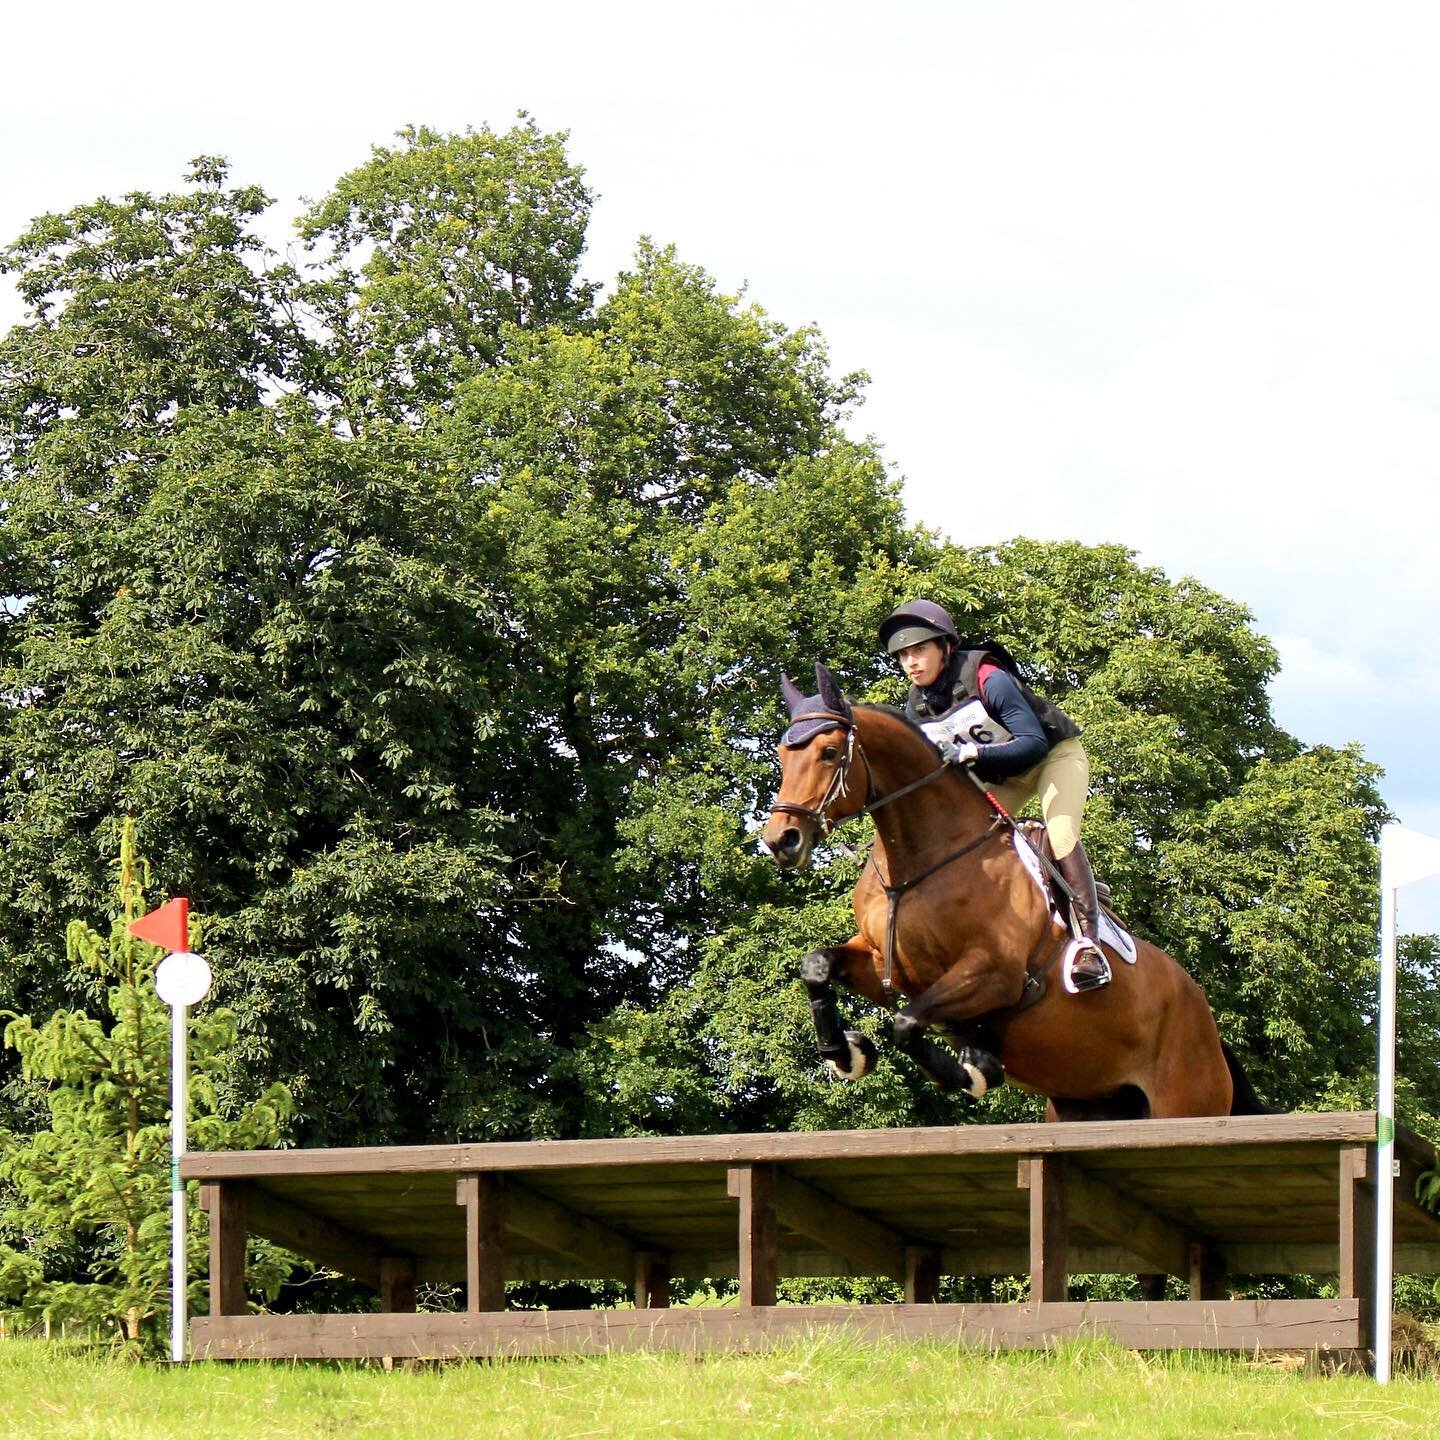 Miss Perfect Let&rsquo;s Dance (April) flying the xc today! I&rsquo;m absolutely loving the progress April is making and just love her in general, currently thinking of all the things I can do to prevent having to sell her in the future 😅

A beautif